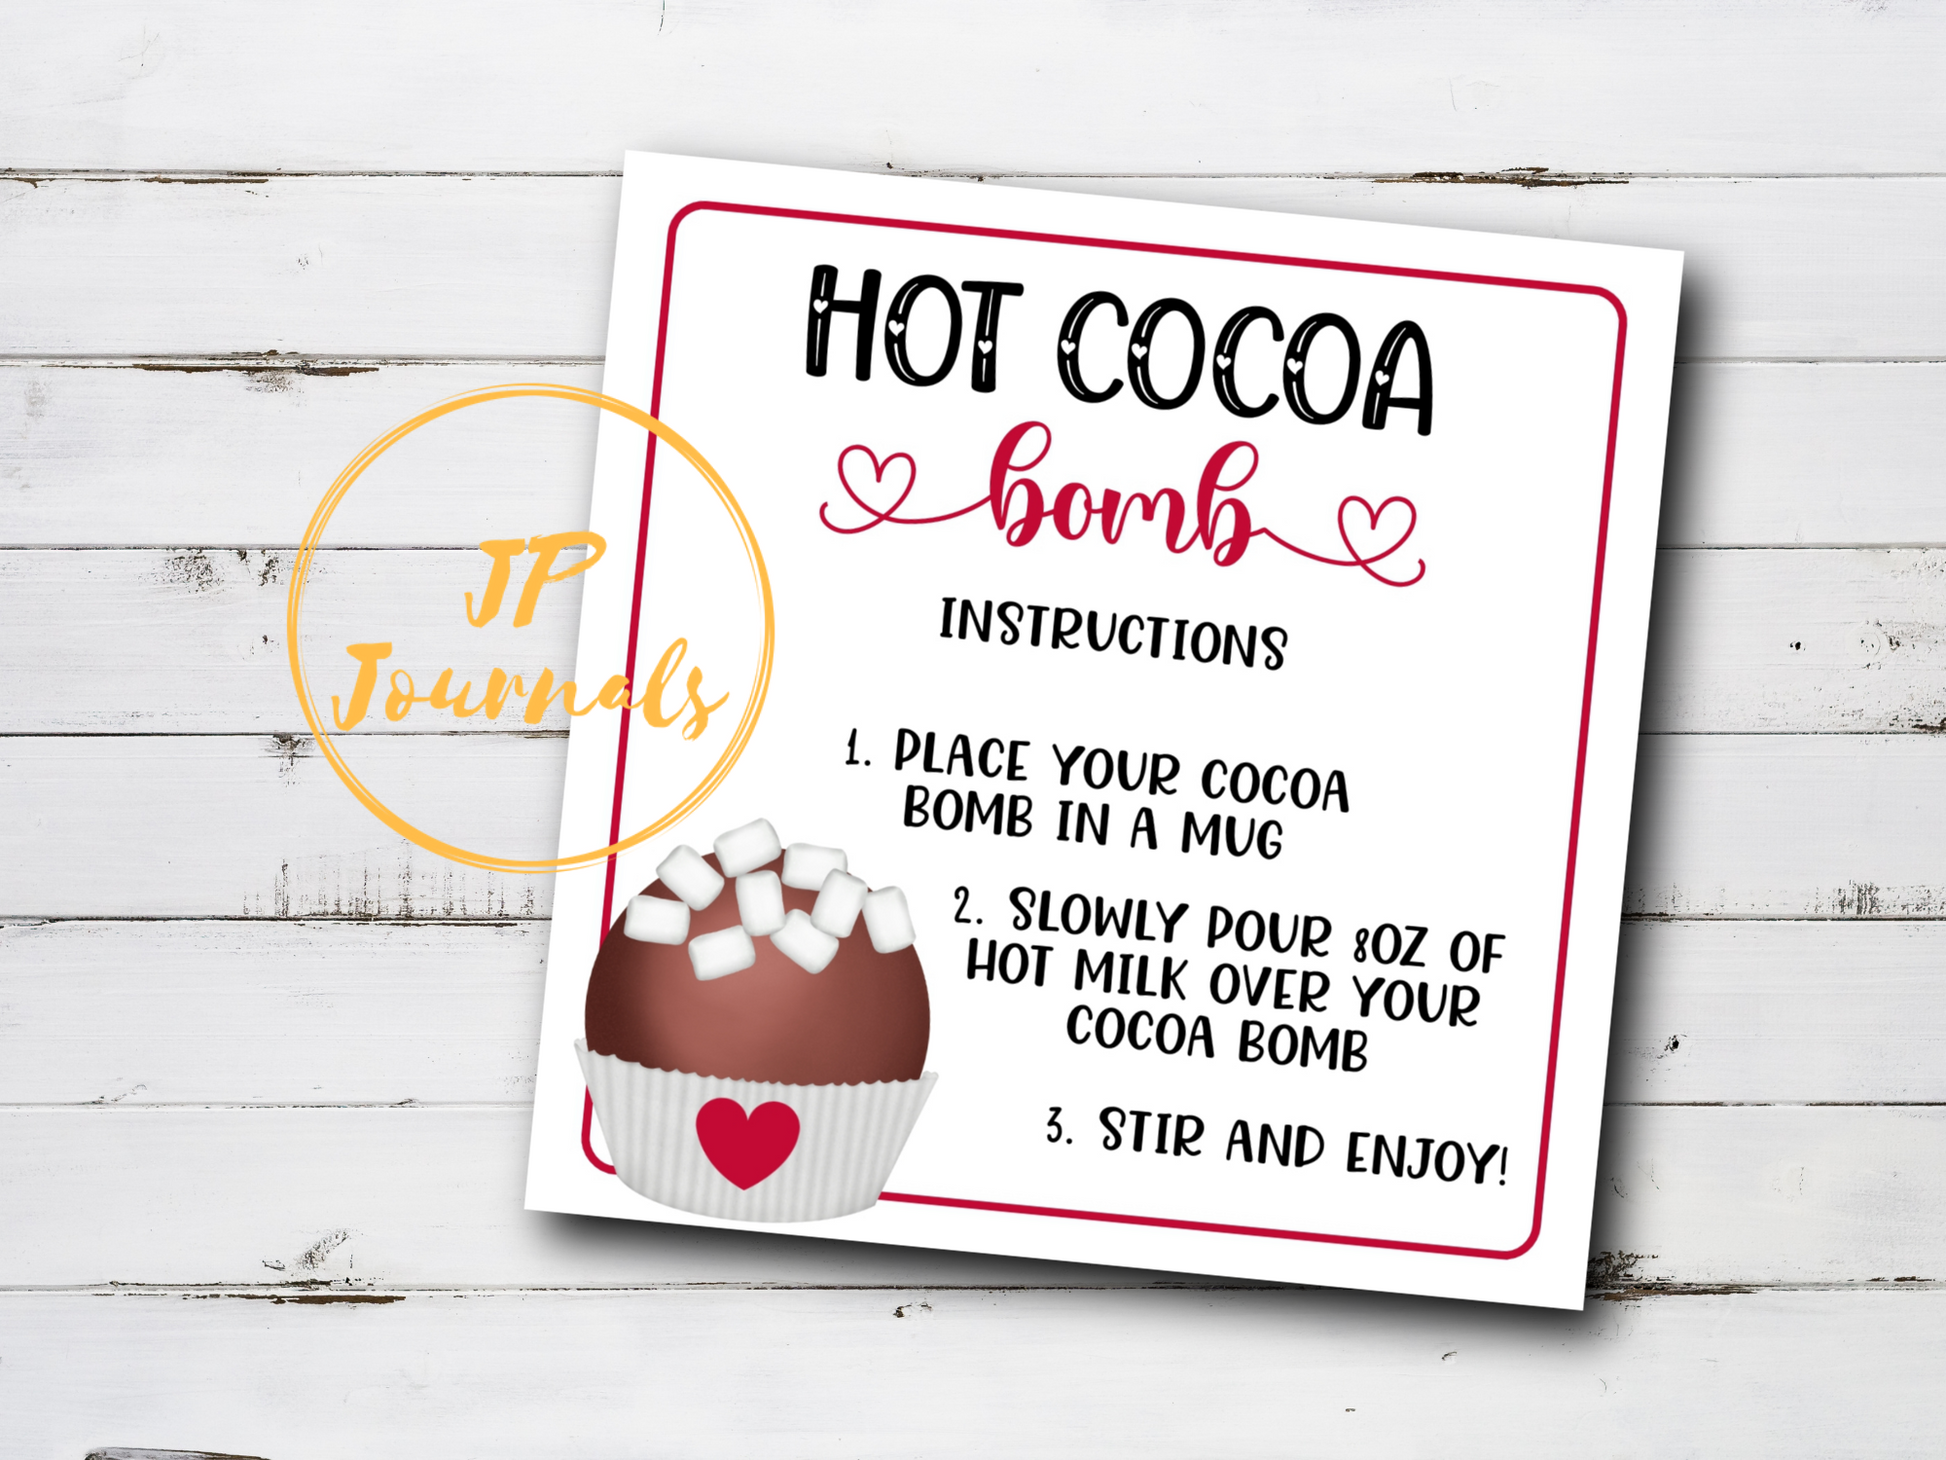 Hot Cocoa Bombs Instructions Printable PDF JPG Instant Download, Hot Chocolate Bomb Instructions